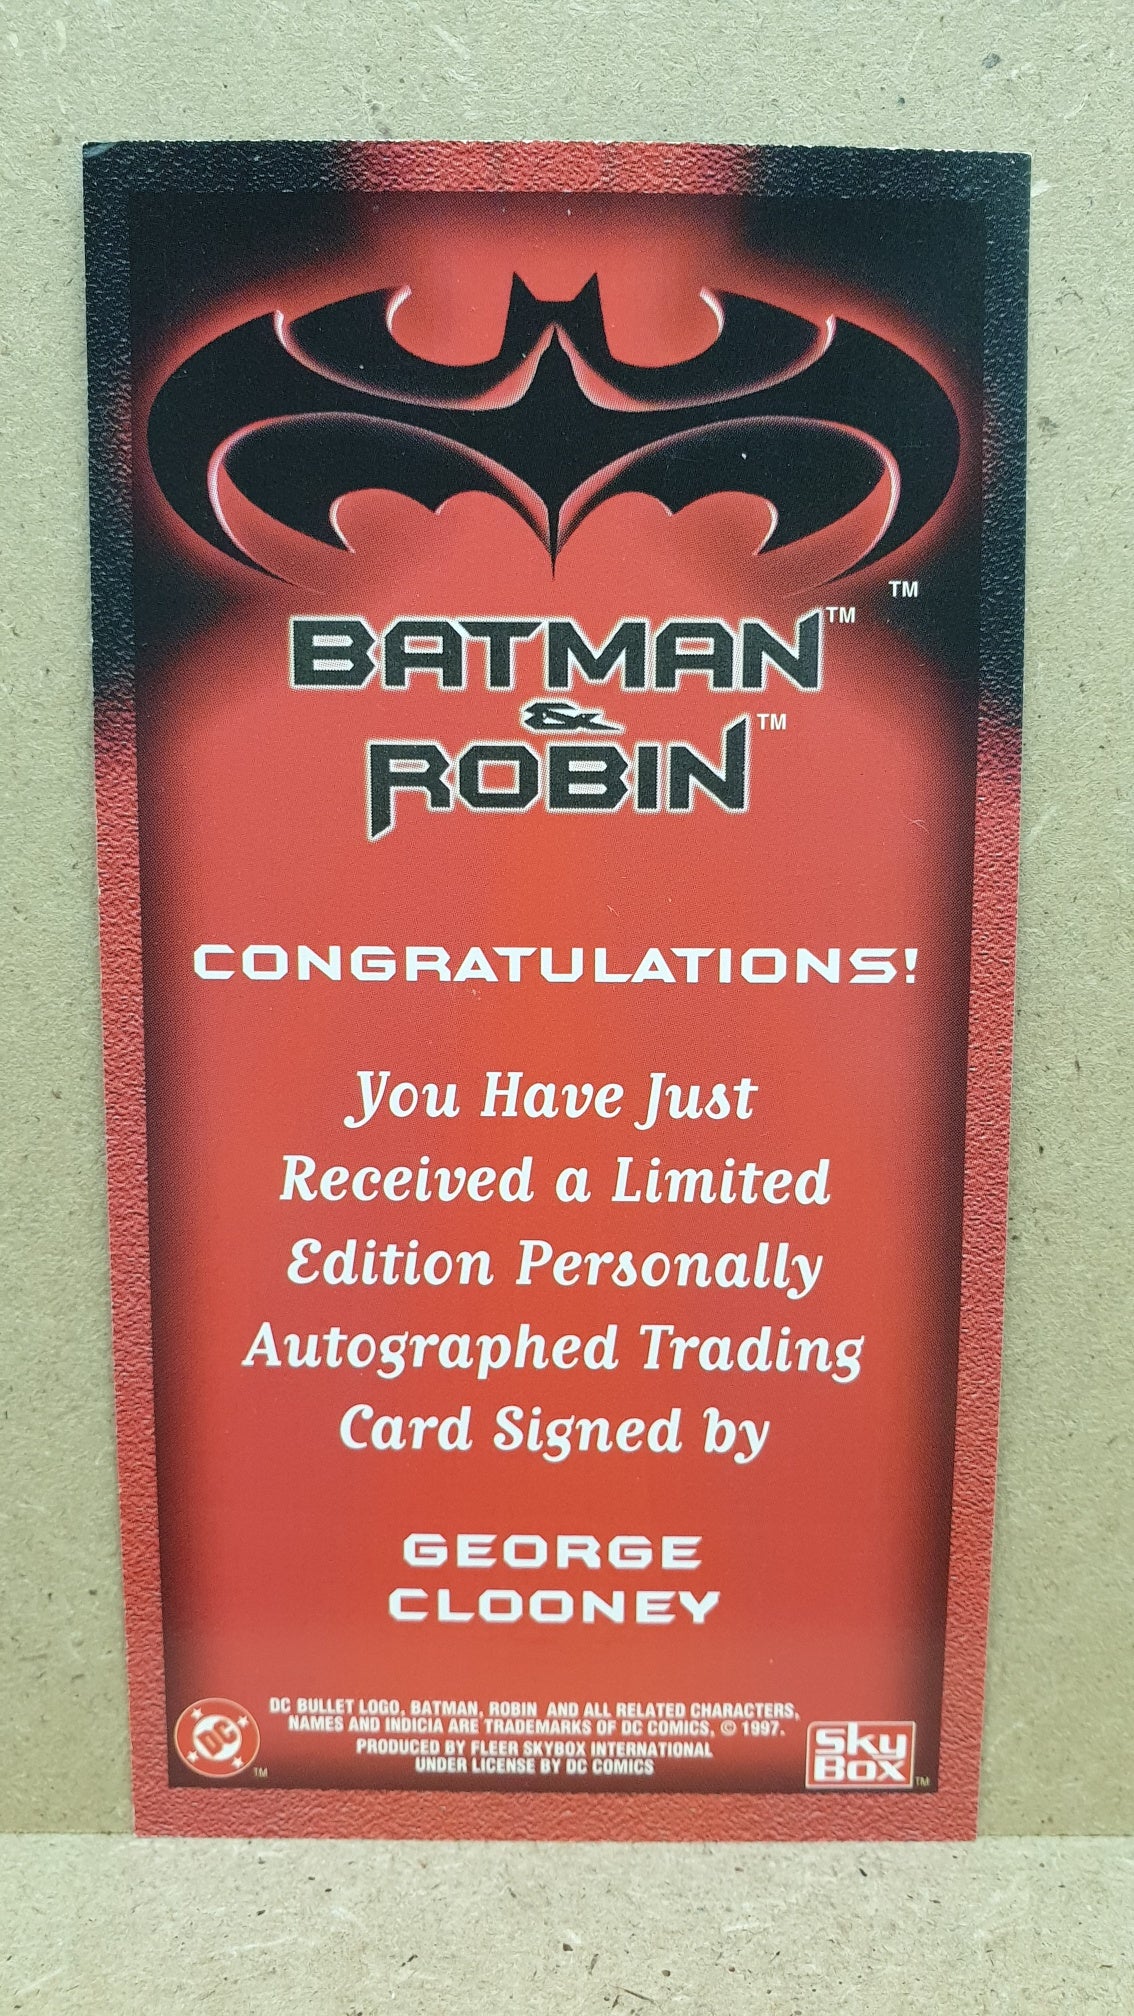 Autographed Trading Card: Batman/George Clooney